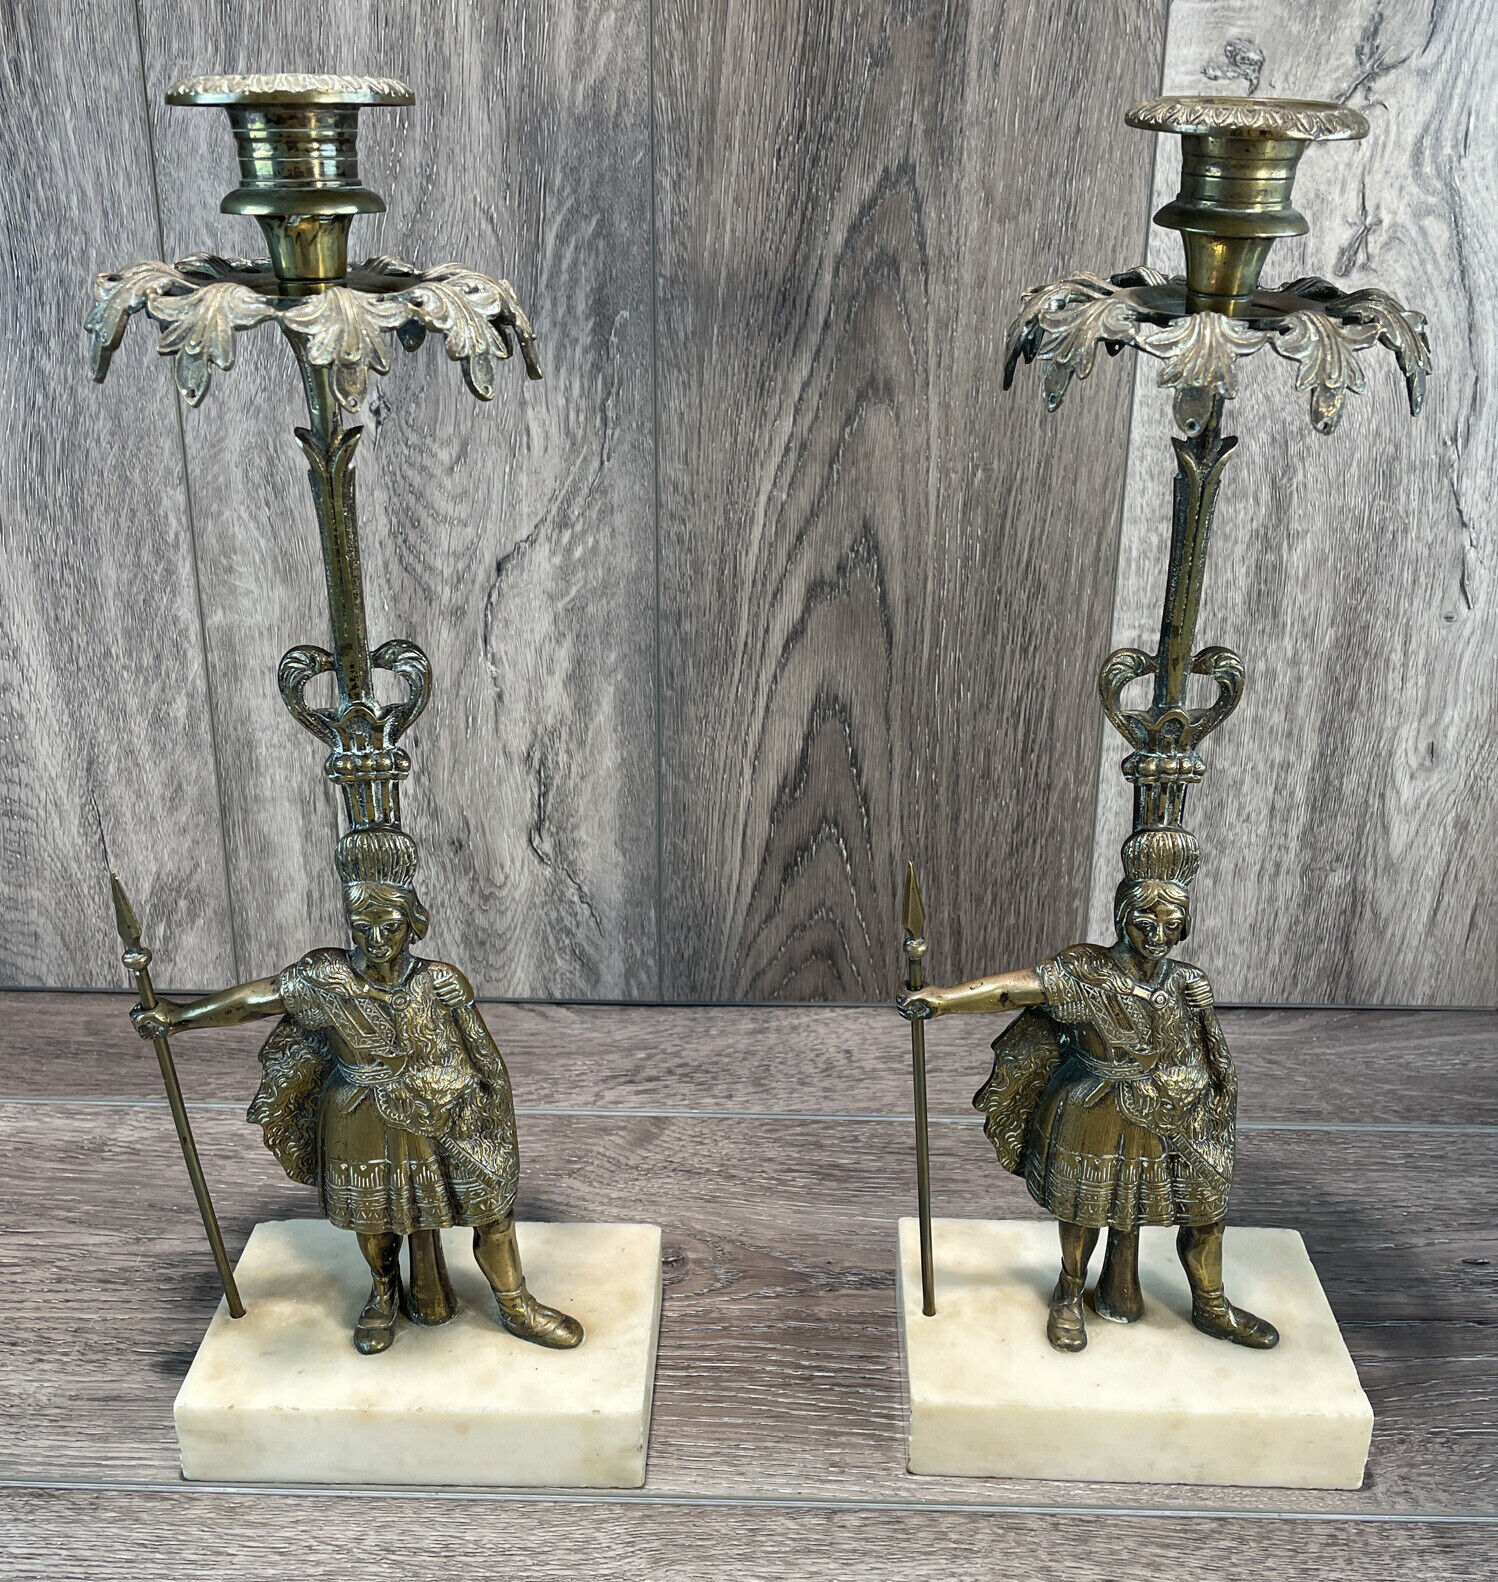 ANTIQUE BRASS CANDLESTICK MARBLE WARRIOR CANDLE HOLDERS 1850 SET OF 2